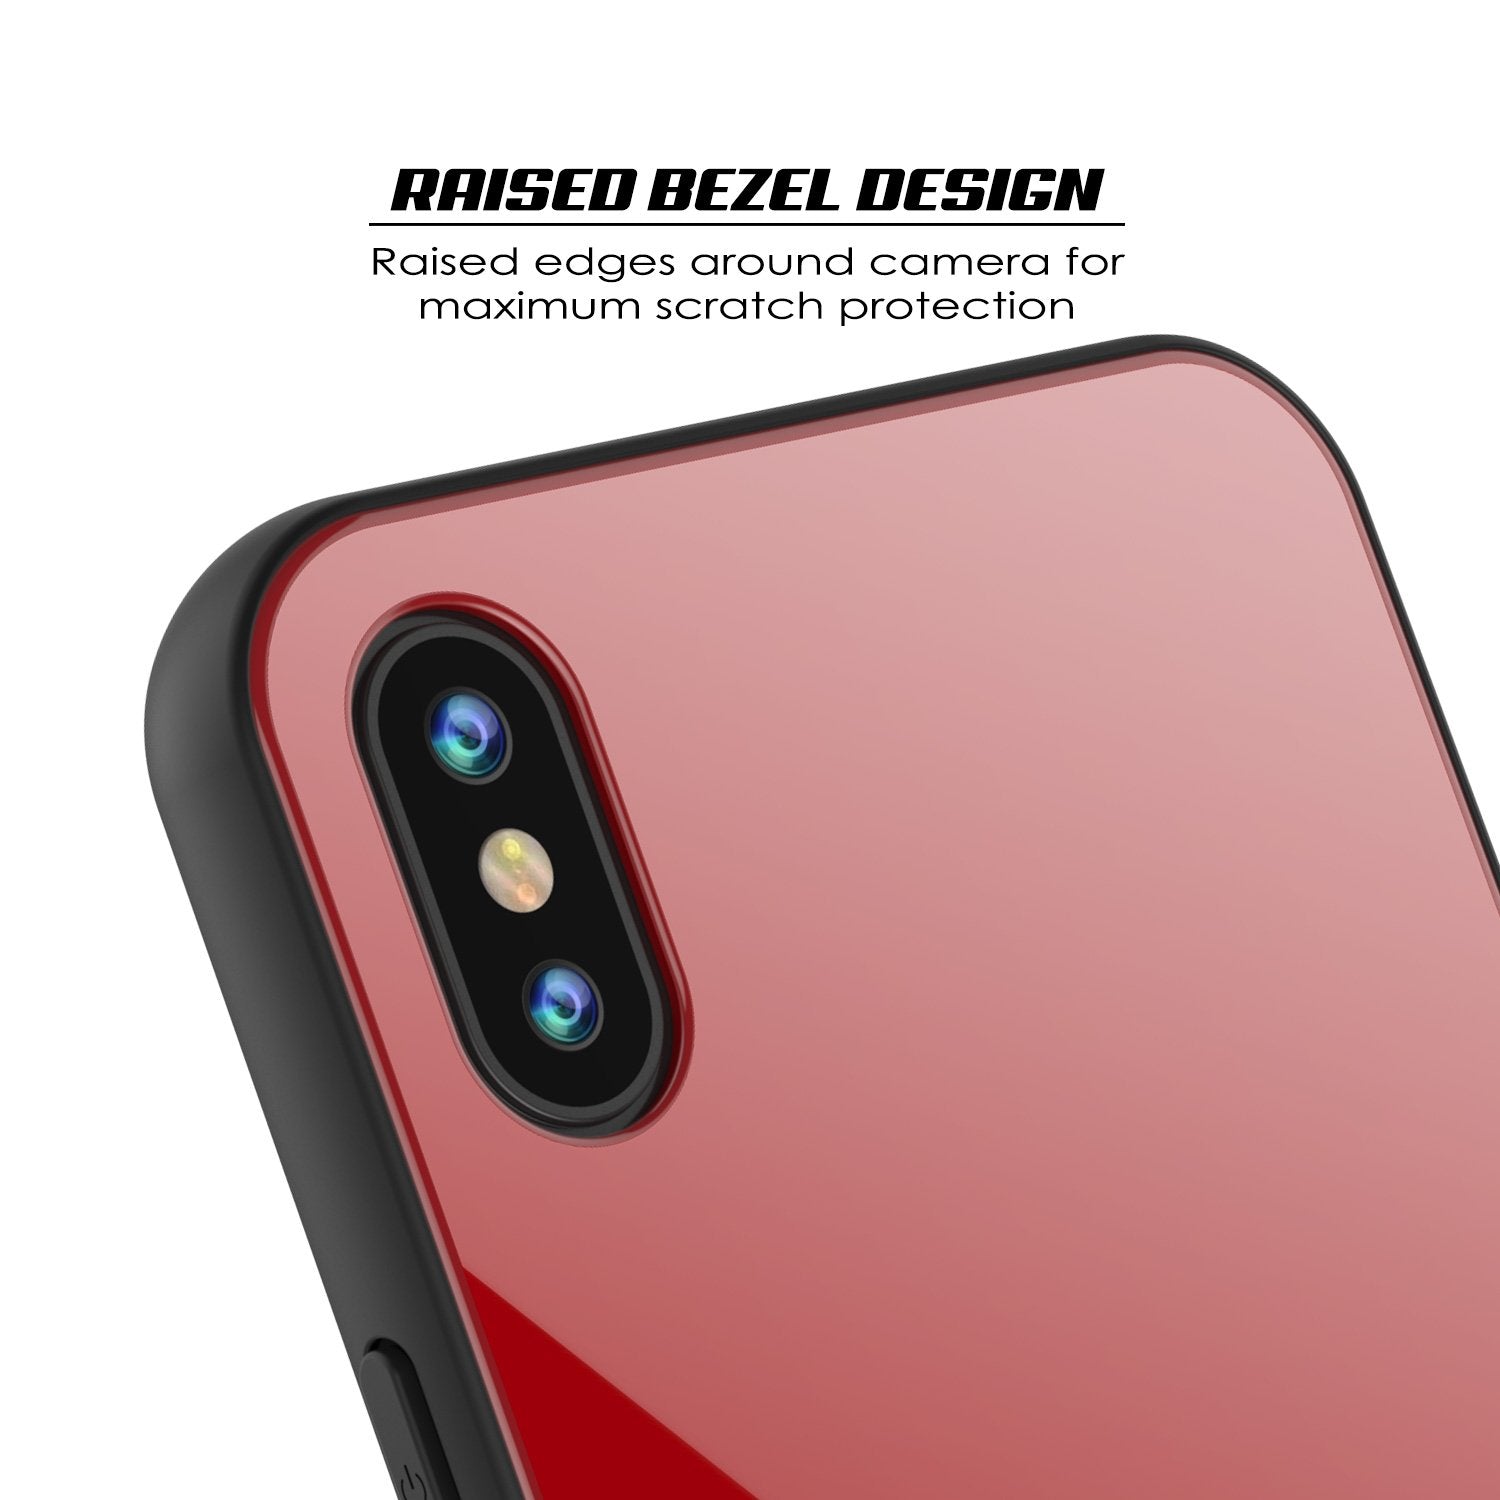 iPhone X Case, Punkcase GlassShield Ultra Thin Protectiv Cover, RED